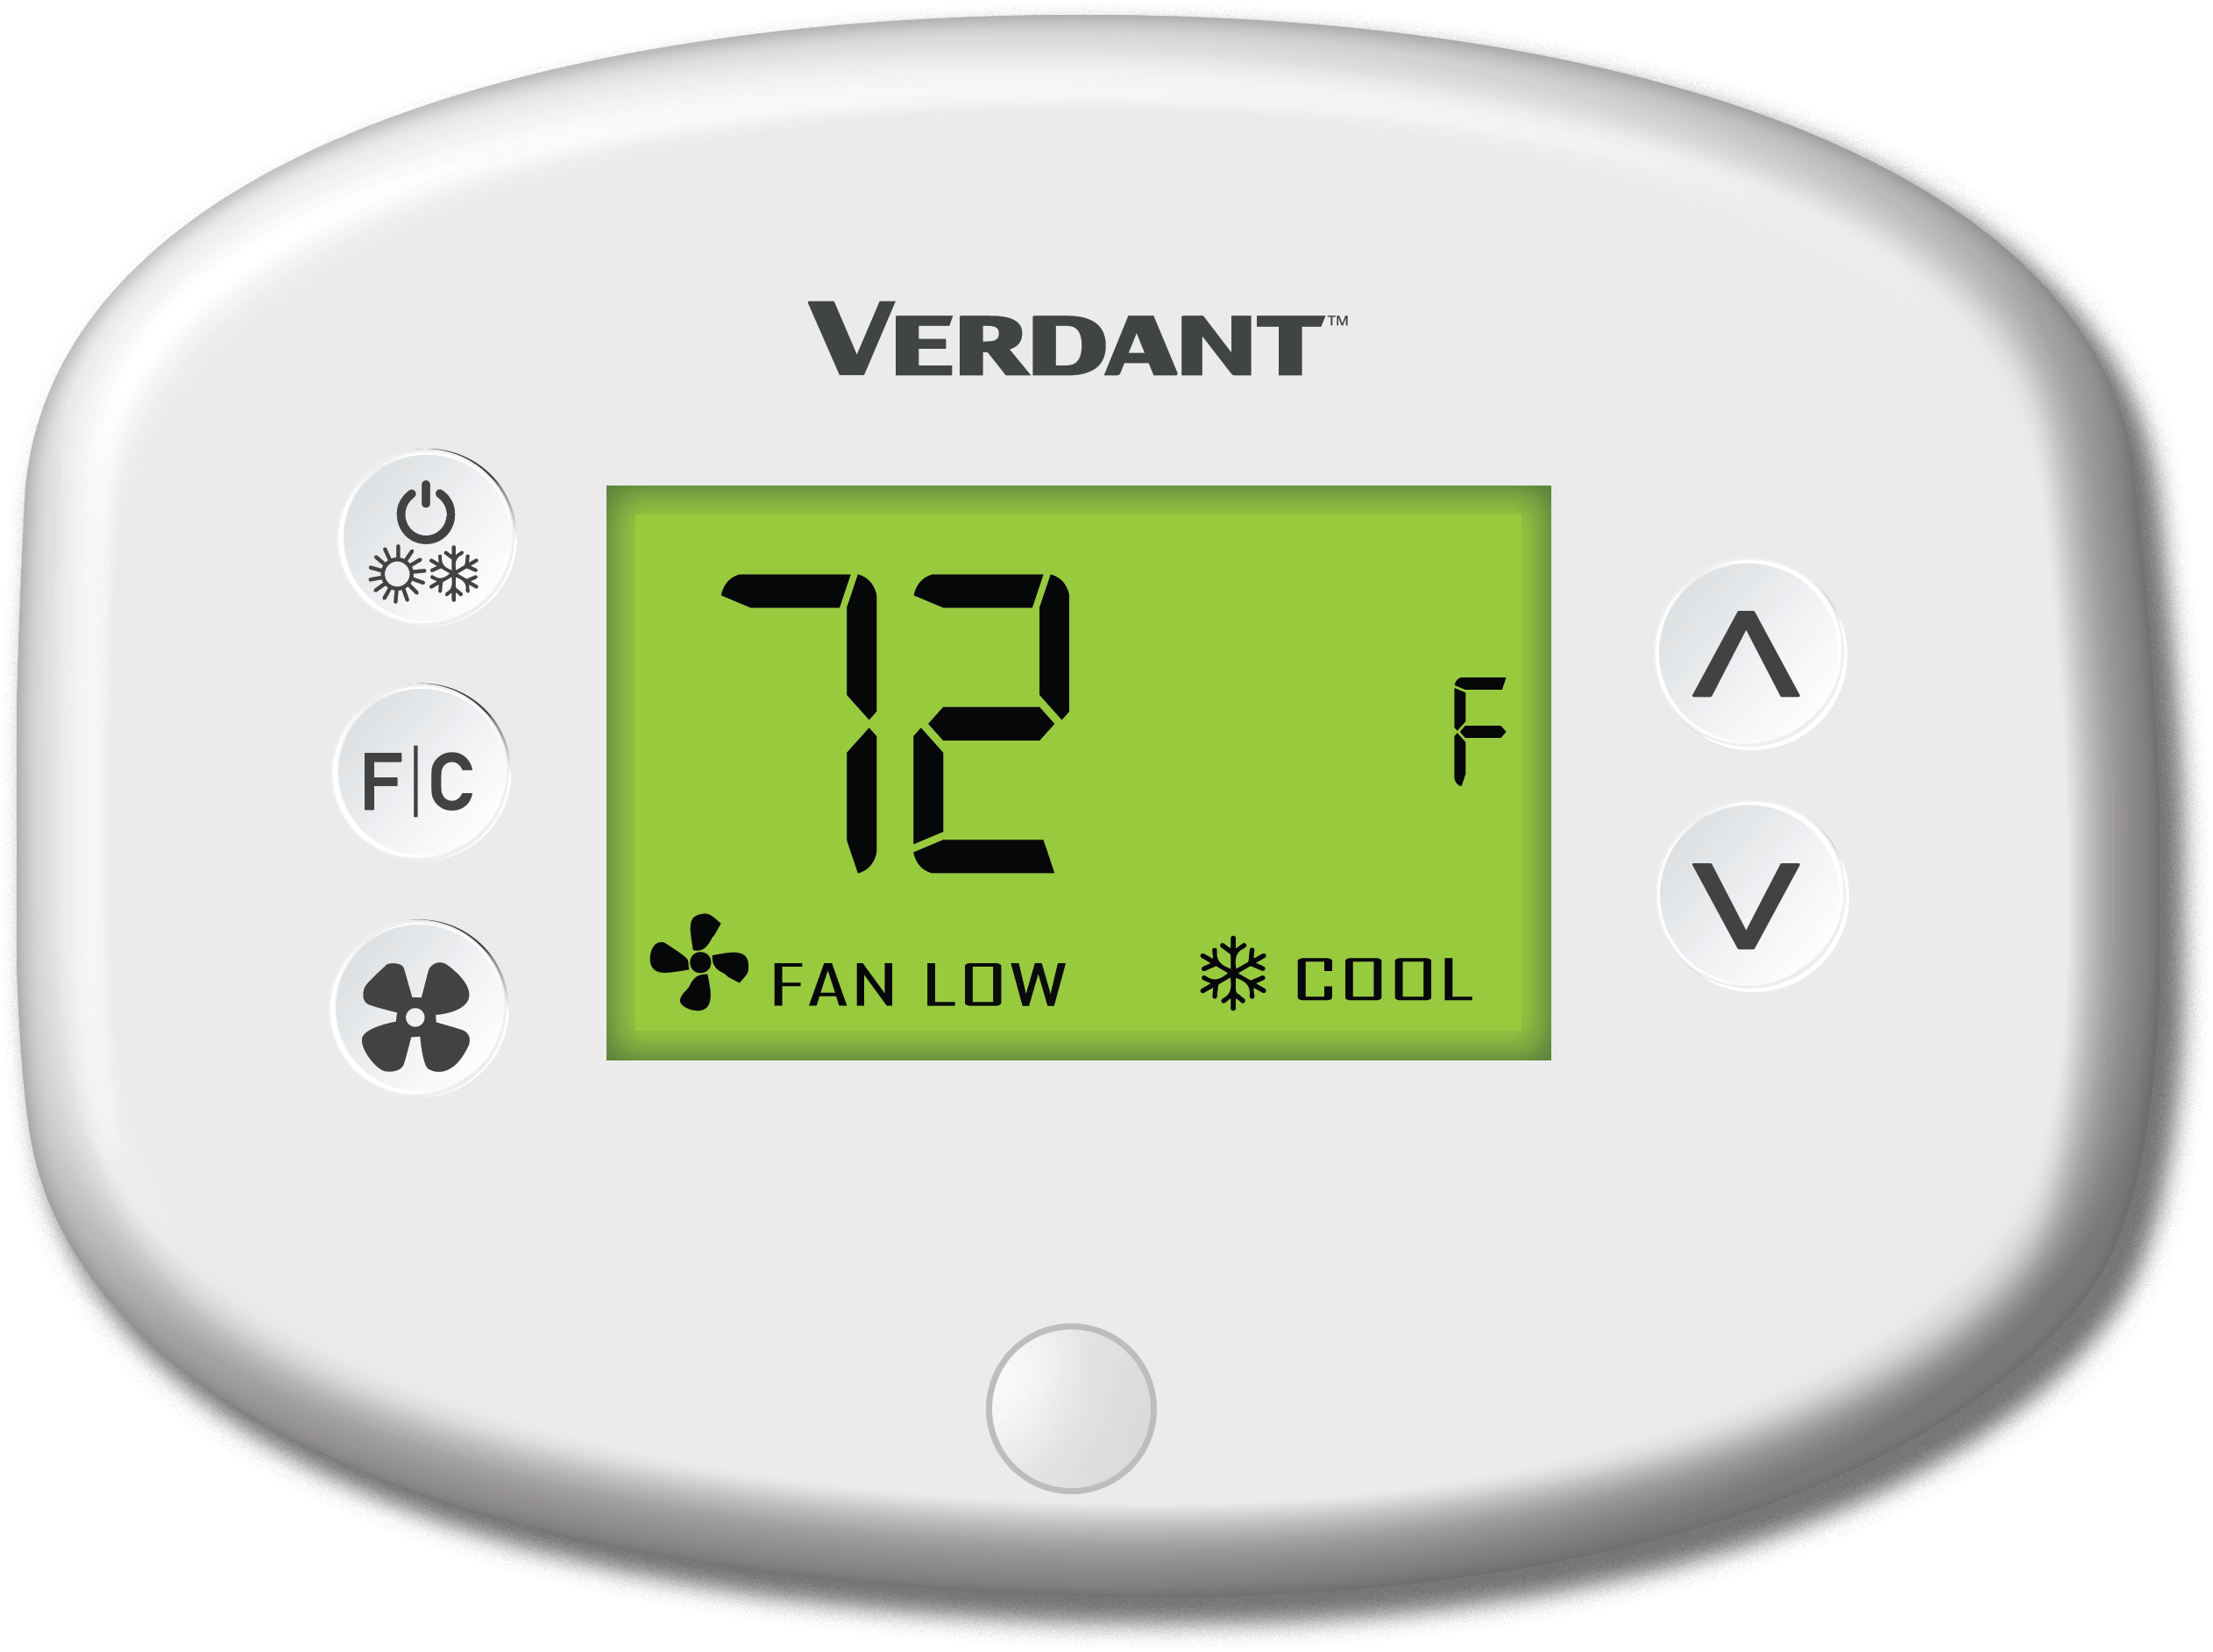 Image of a white colored Verdant VX thermostat